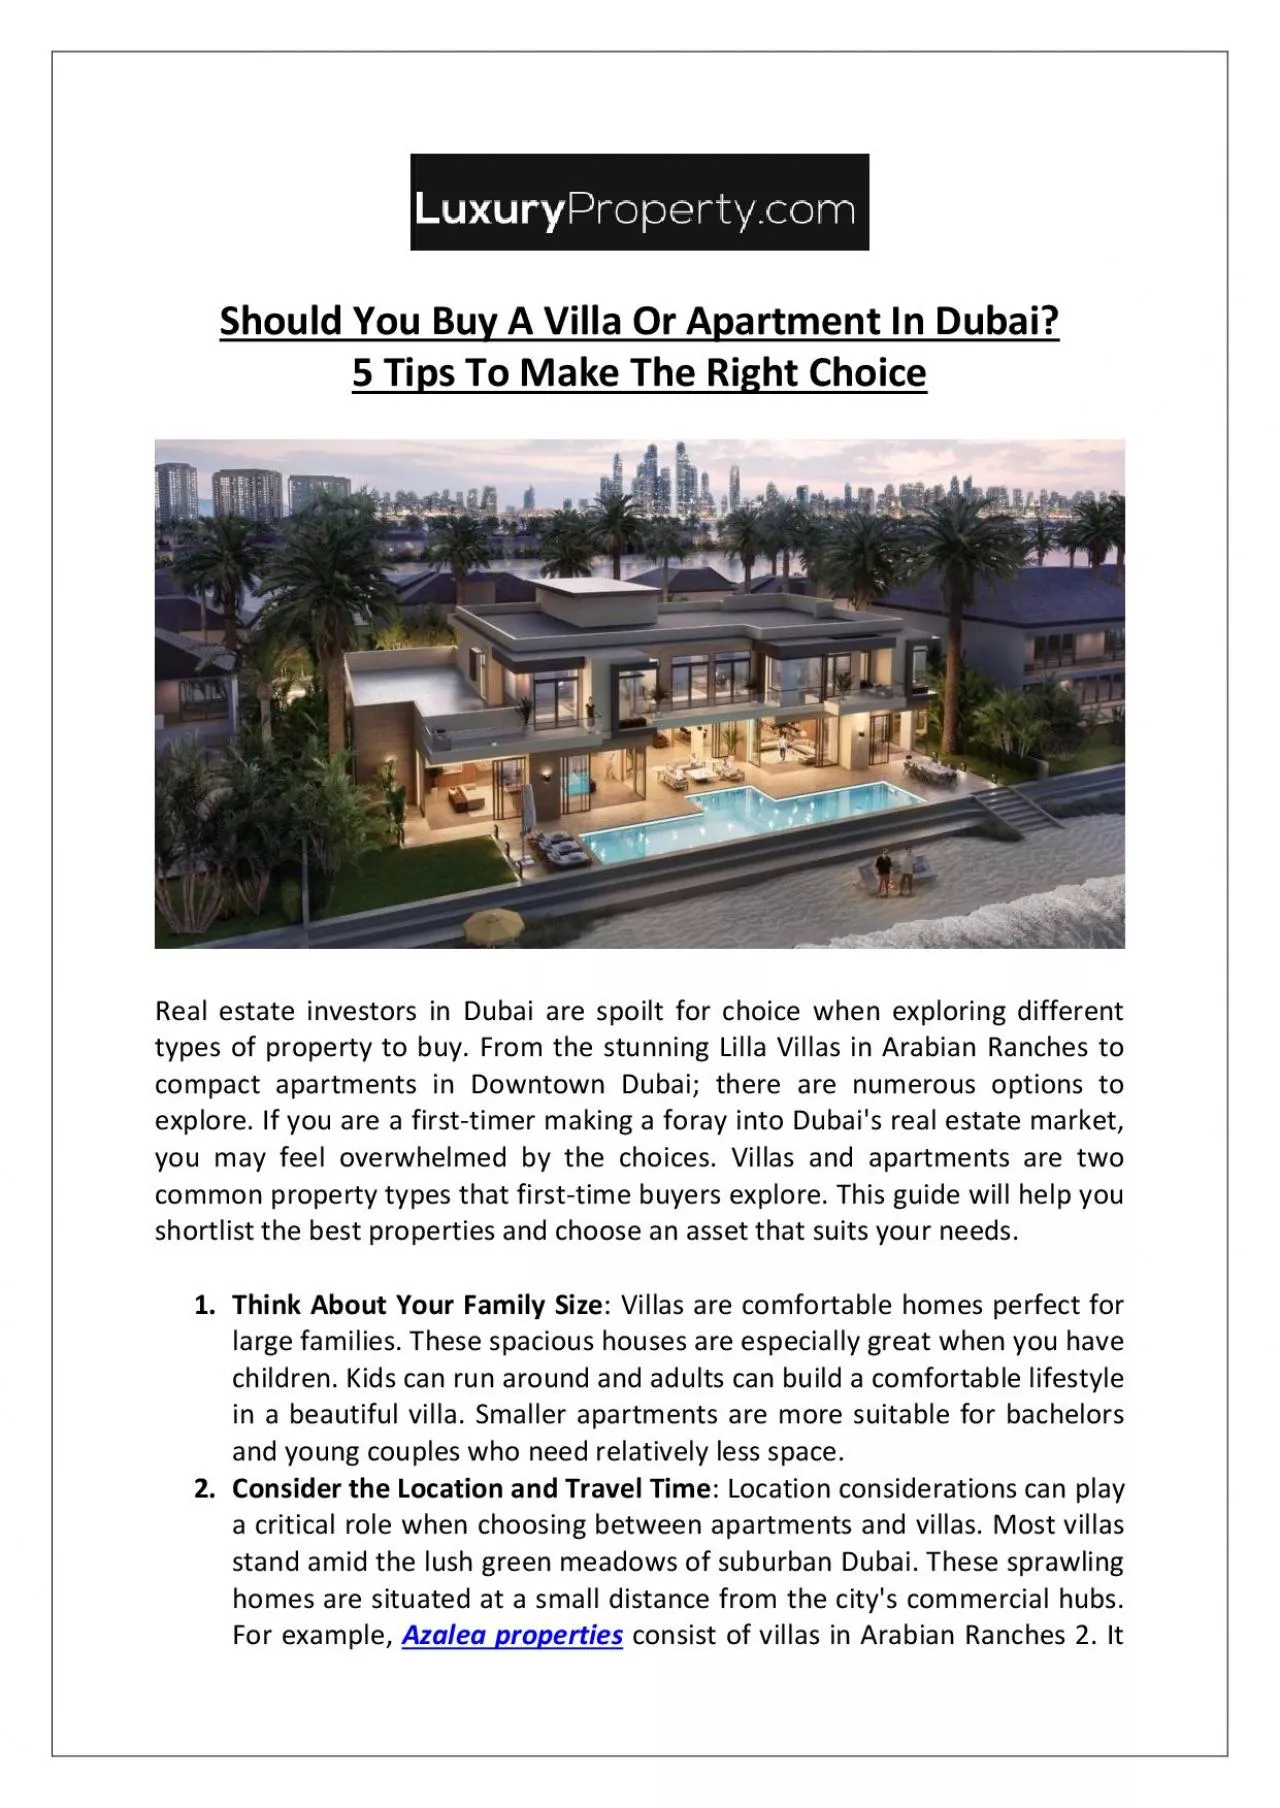 Should You Buy A Villa Or Apartment In Dubai? 5 Tips To Make The Right Choice